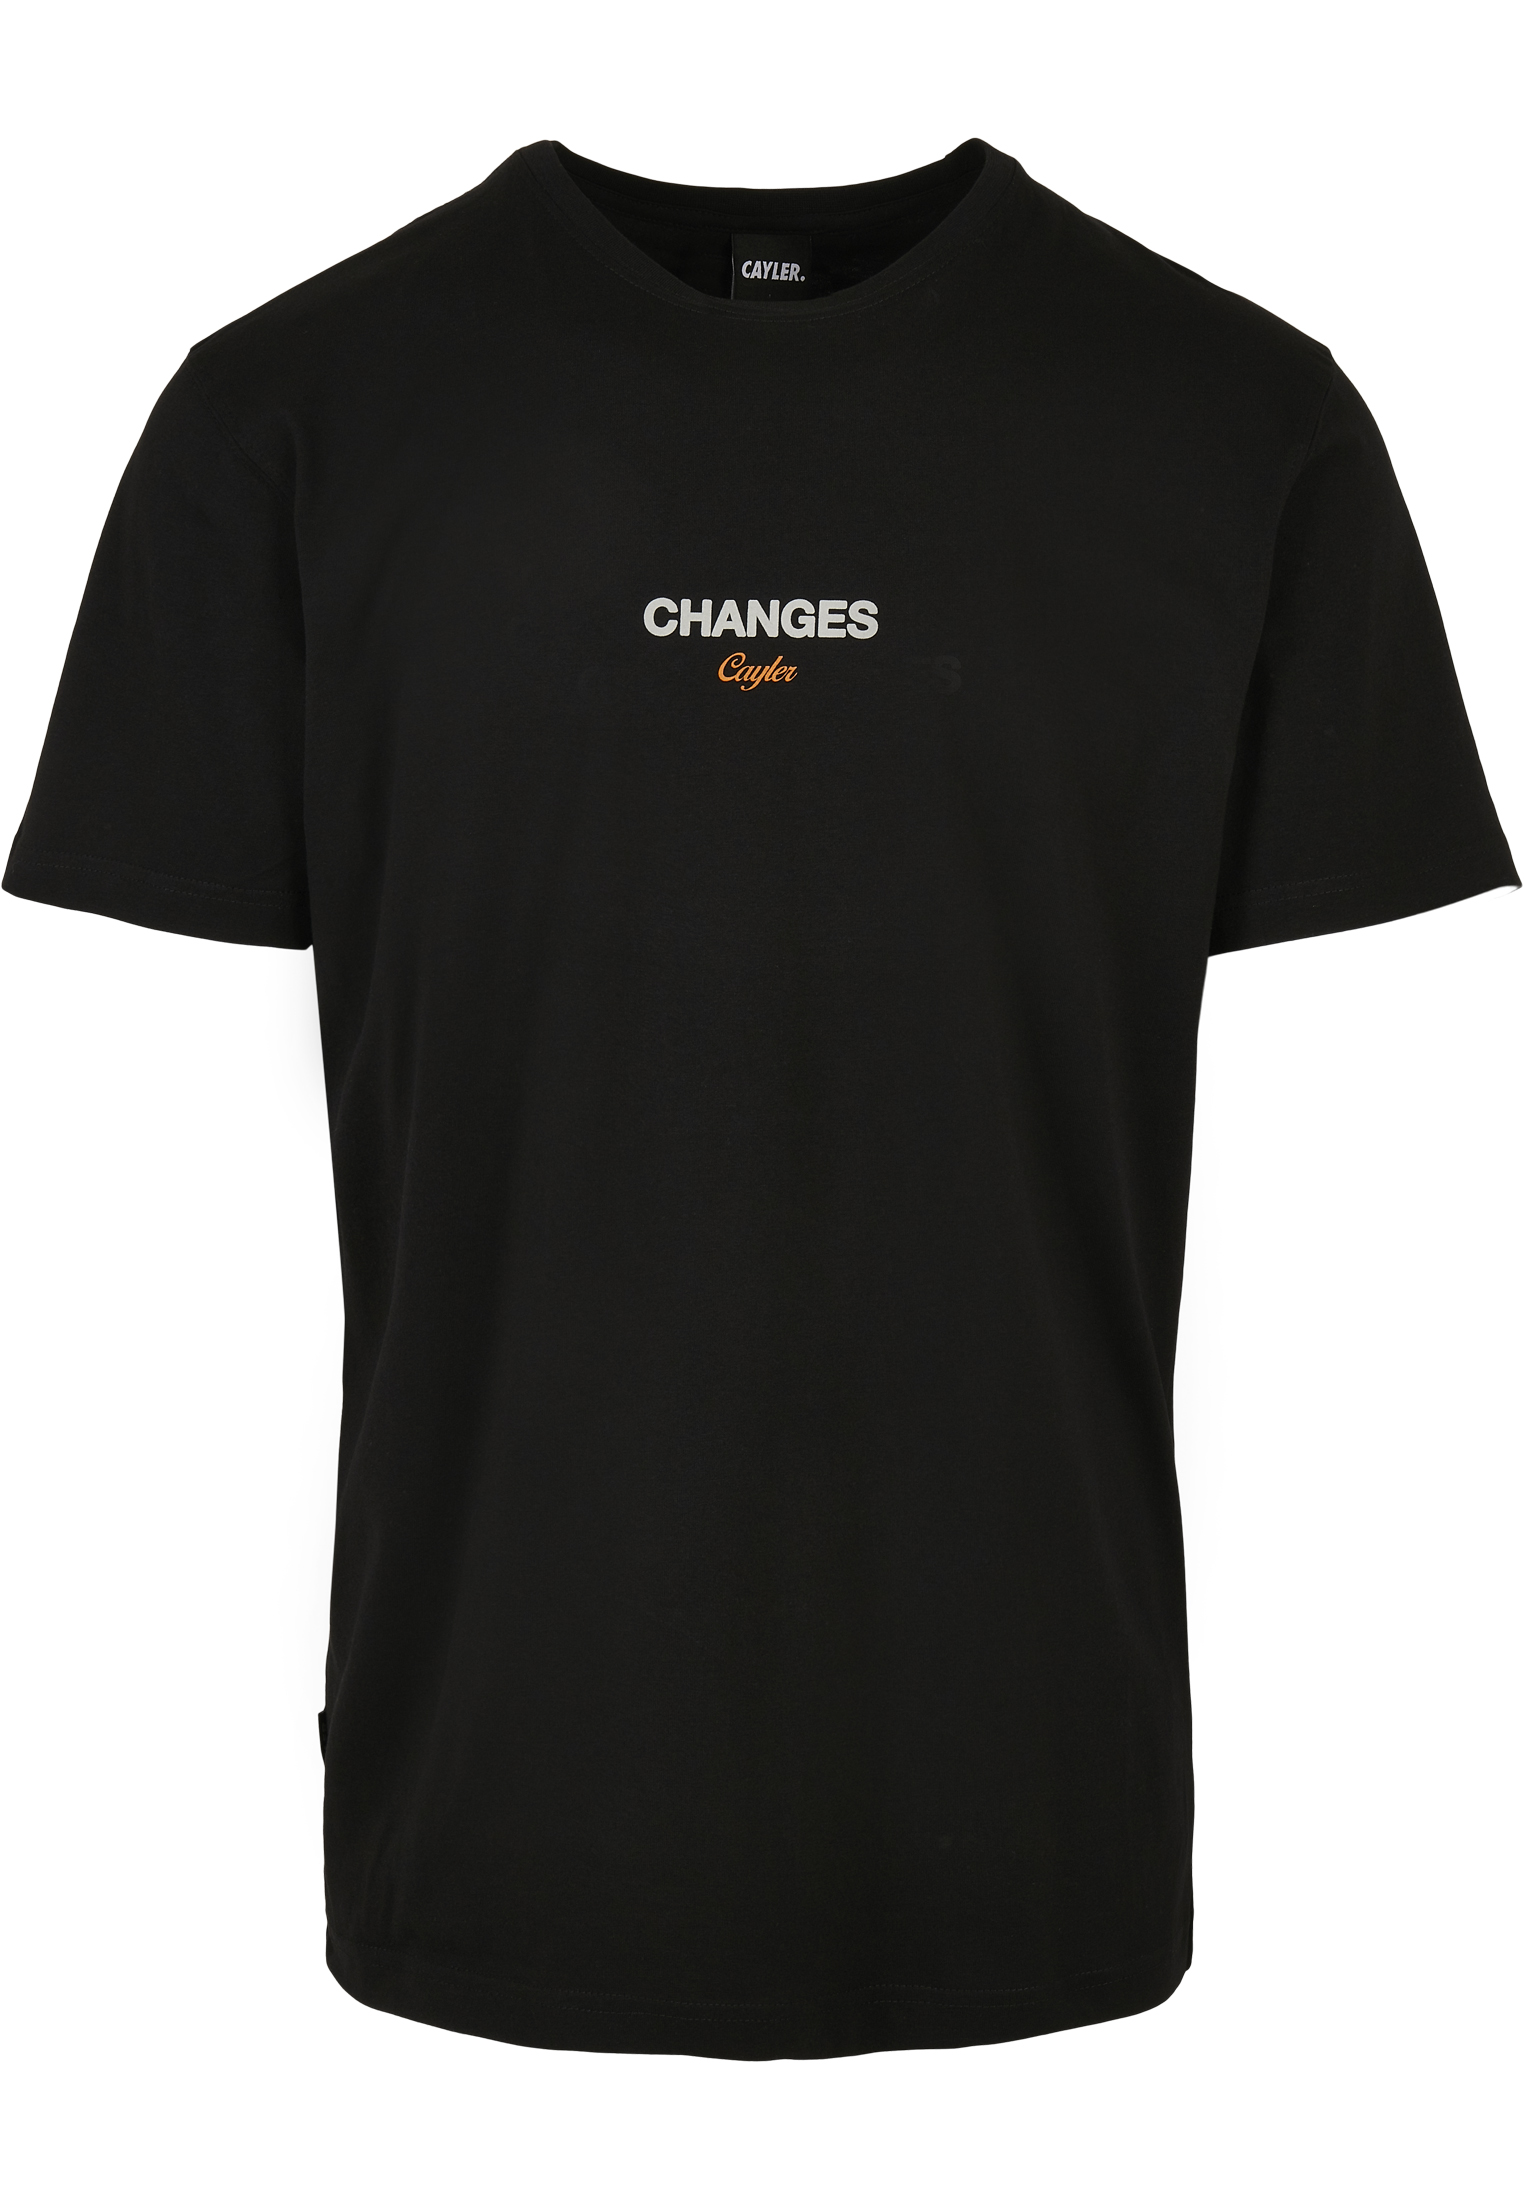 Cayler and Sons C&S Changes Tee